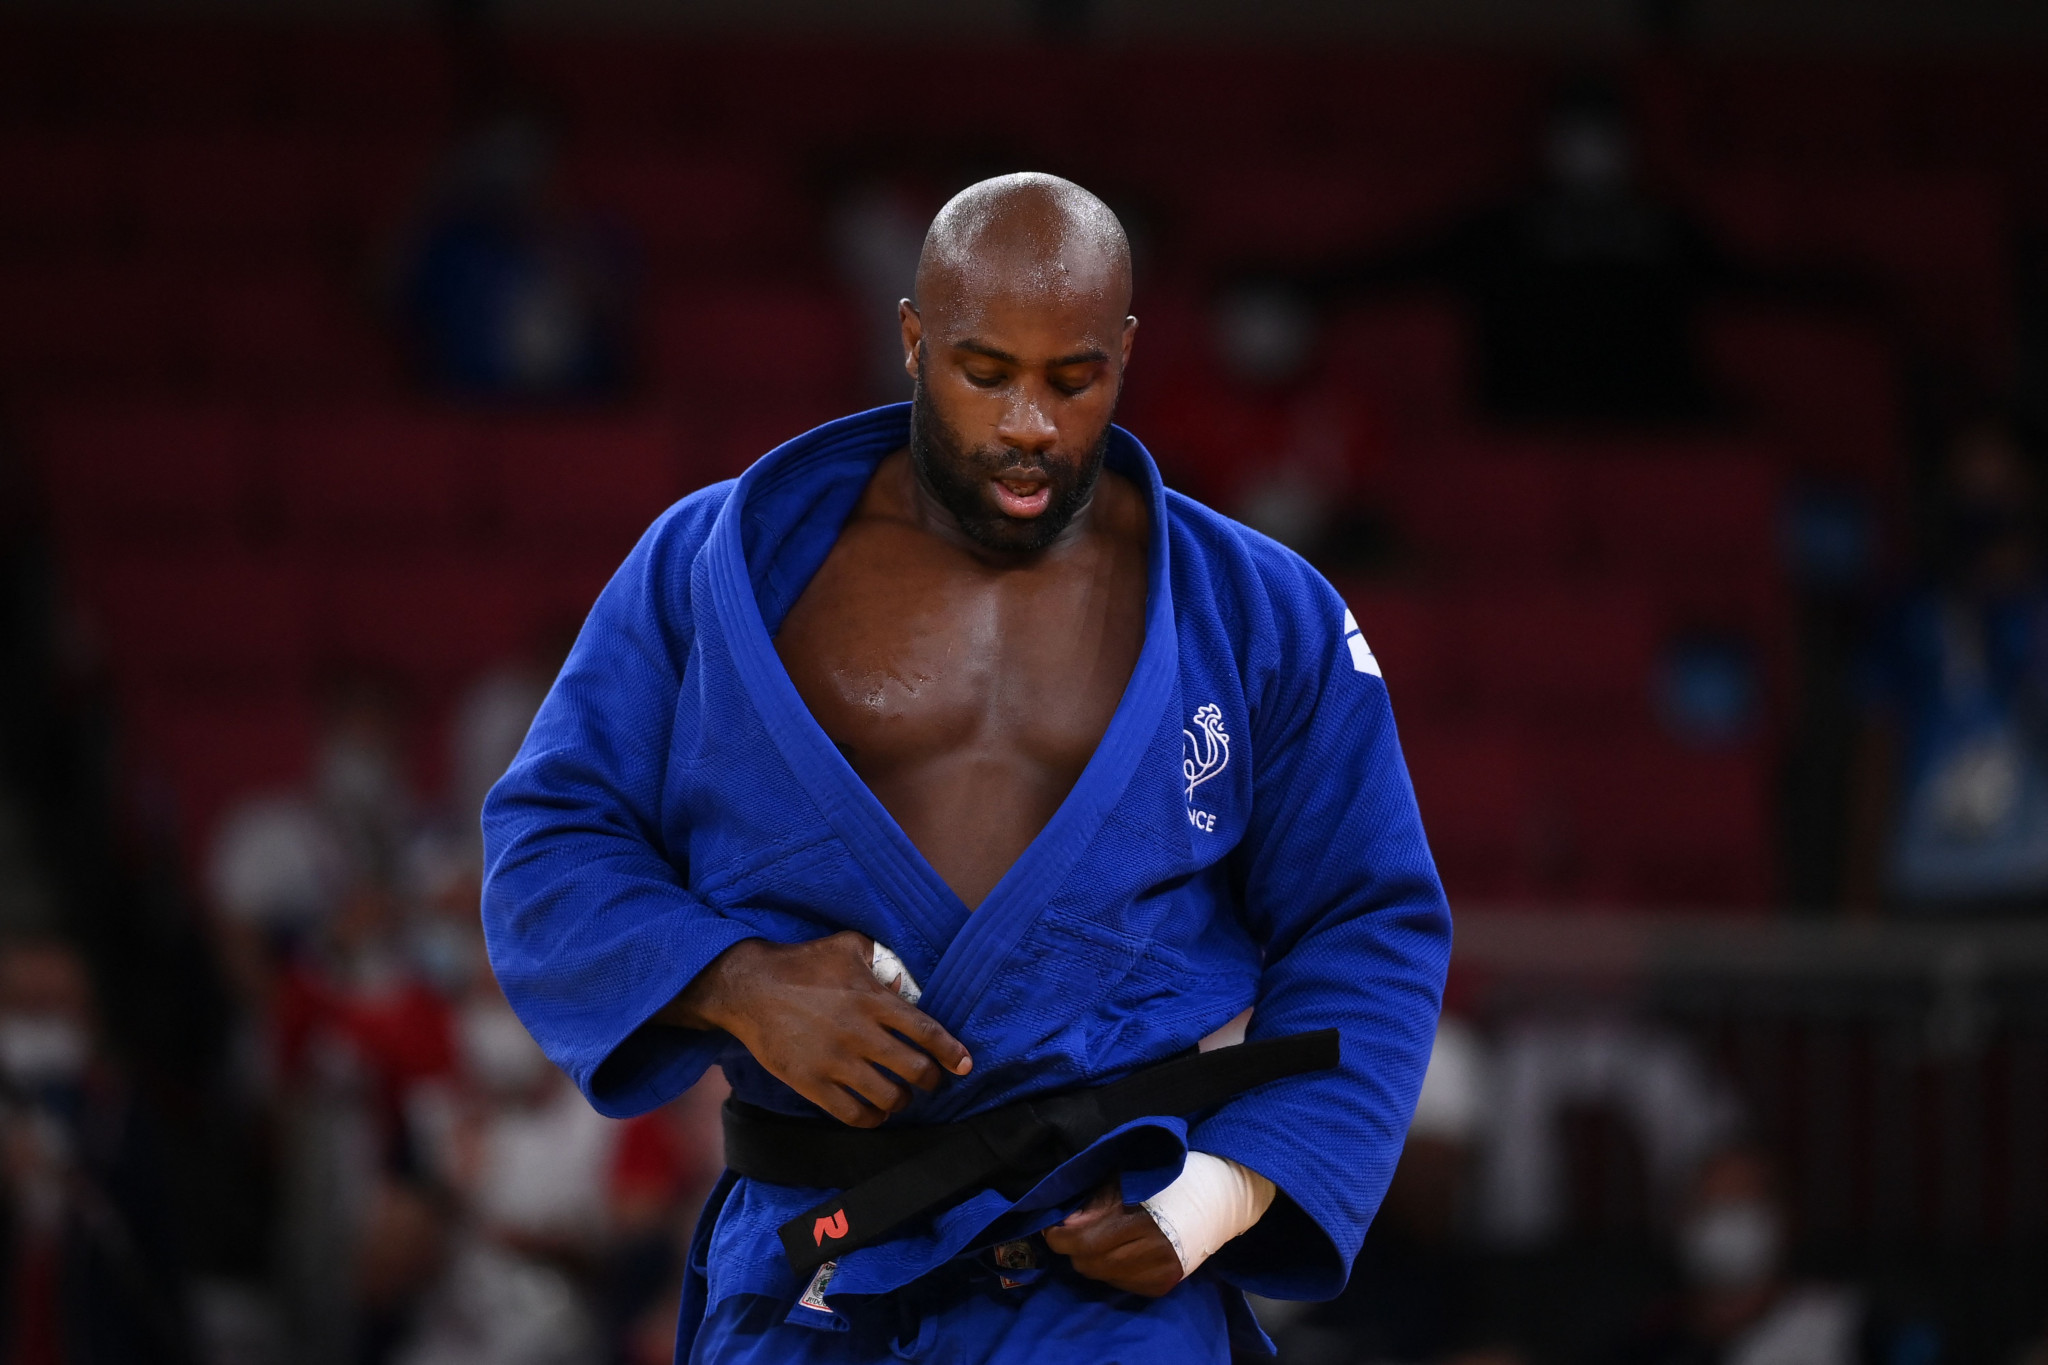 Riner admits to being scared to compete in case he gets injured before Paris 2024